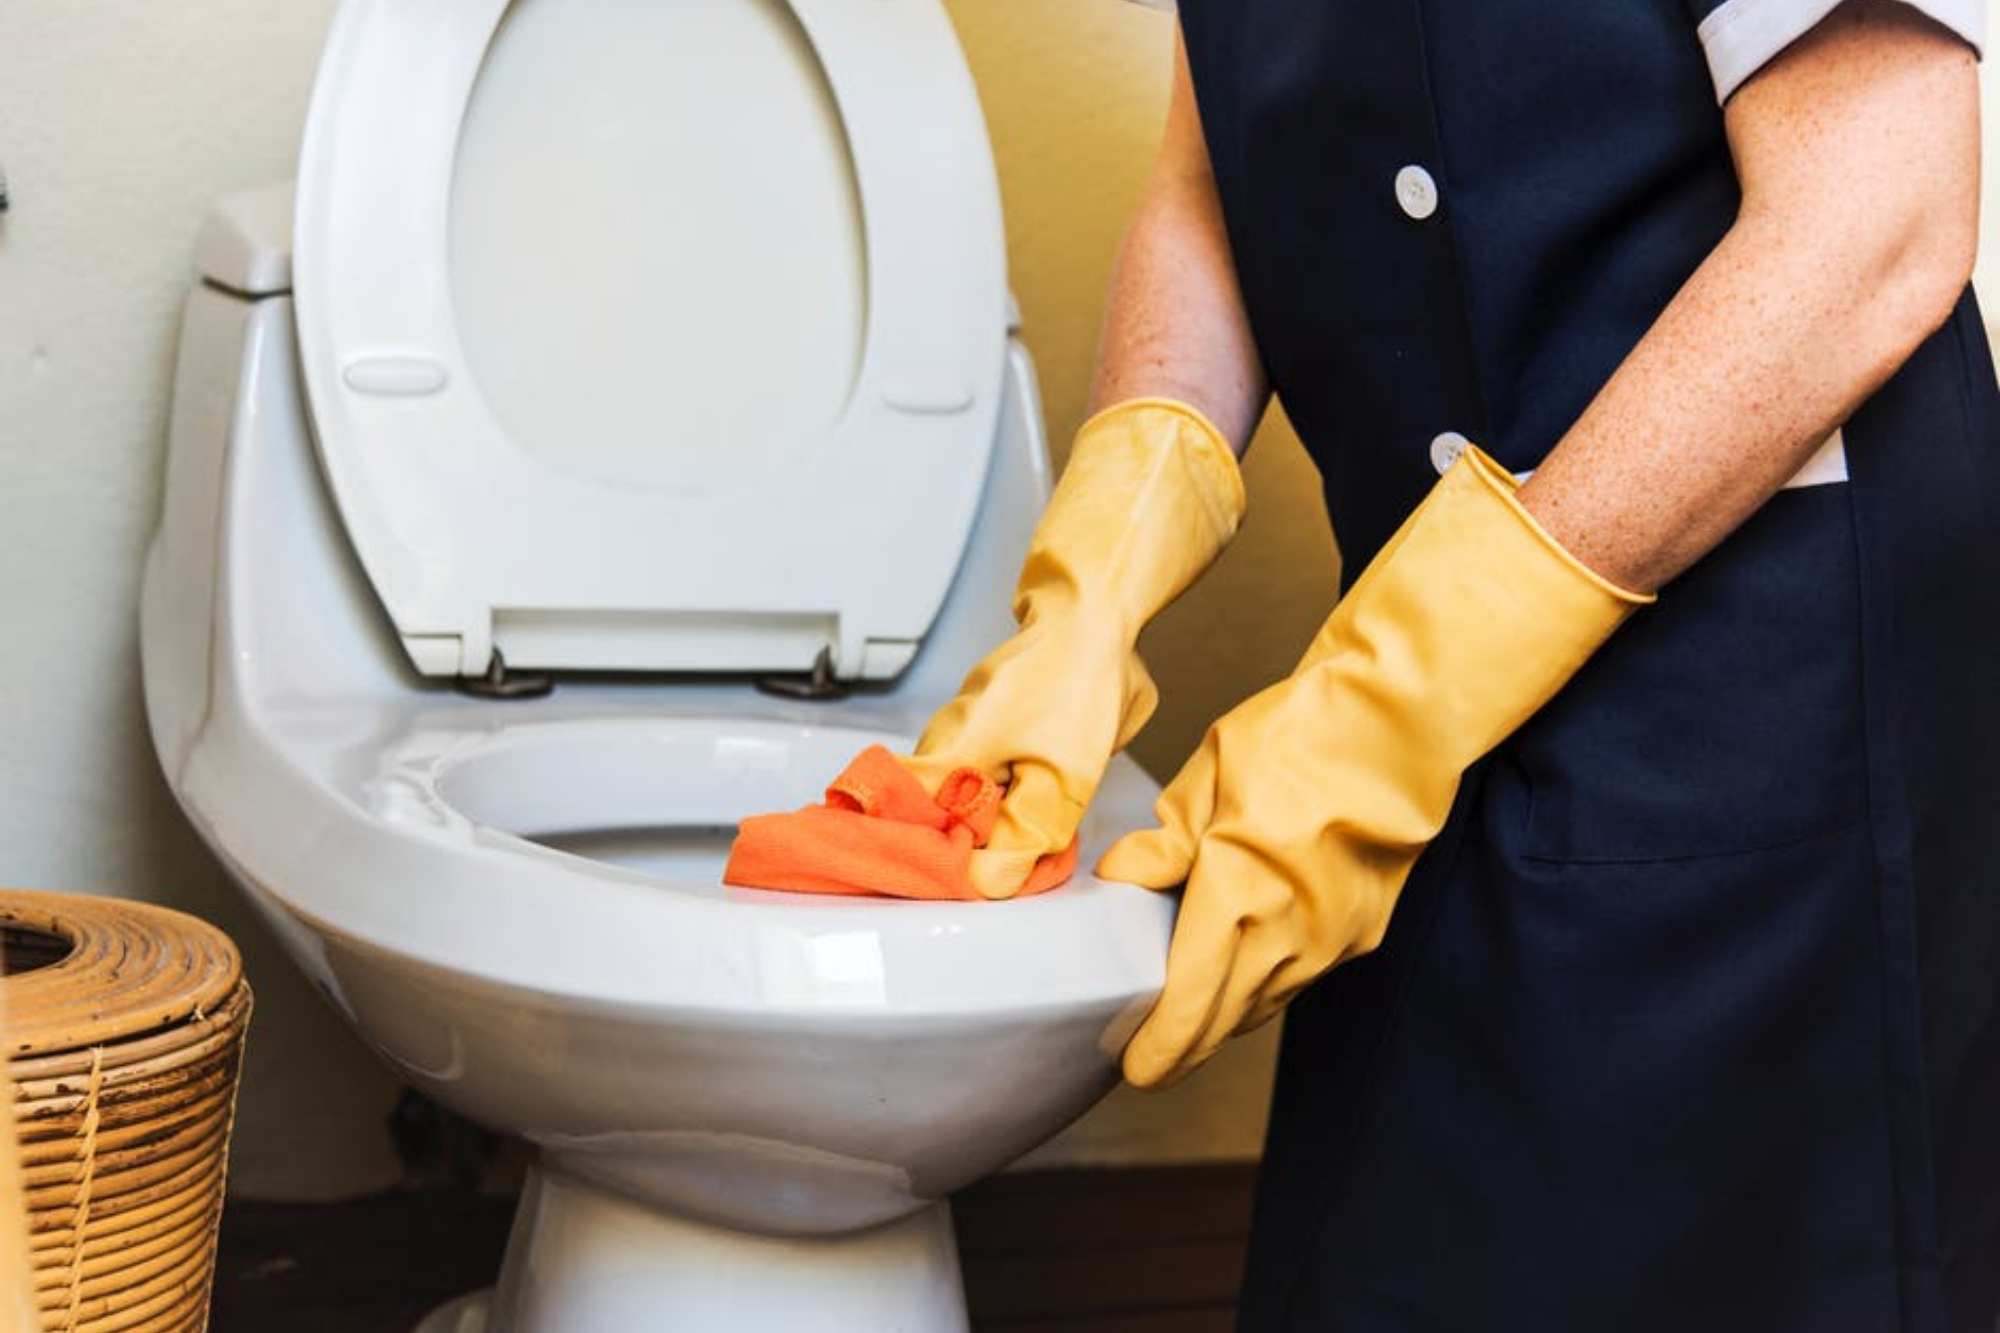 how to clean under the rim of a toilet